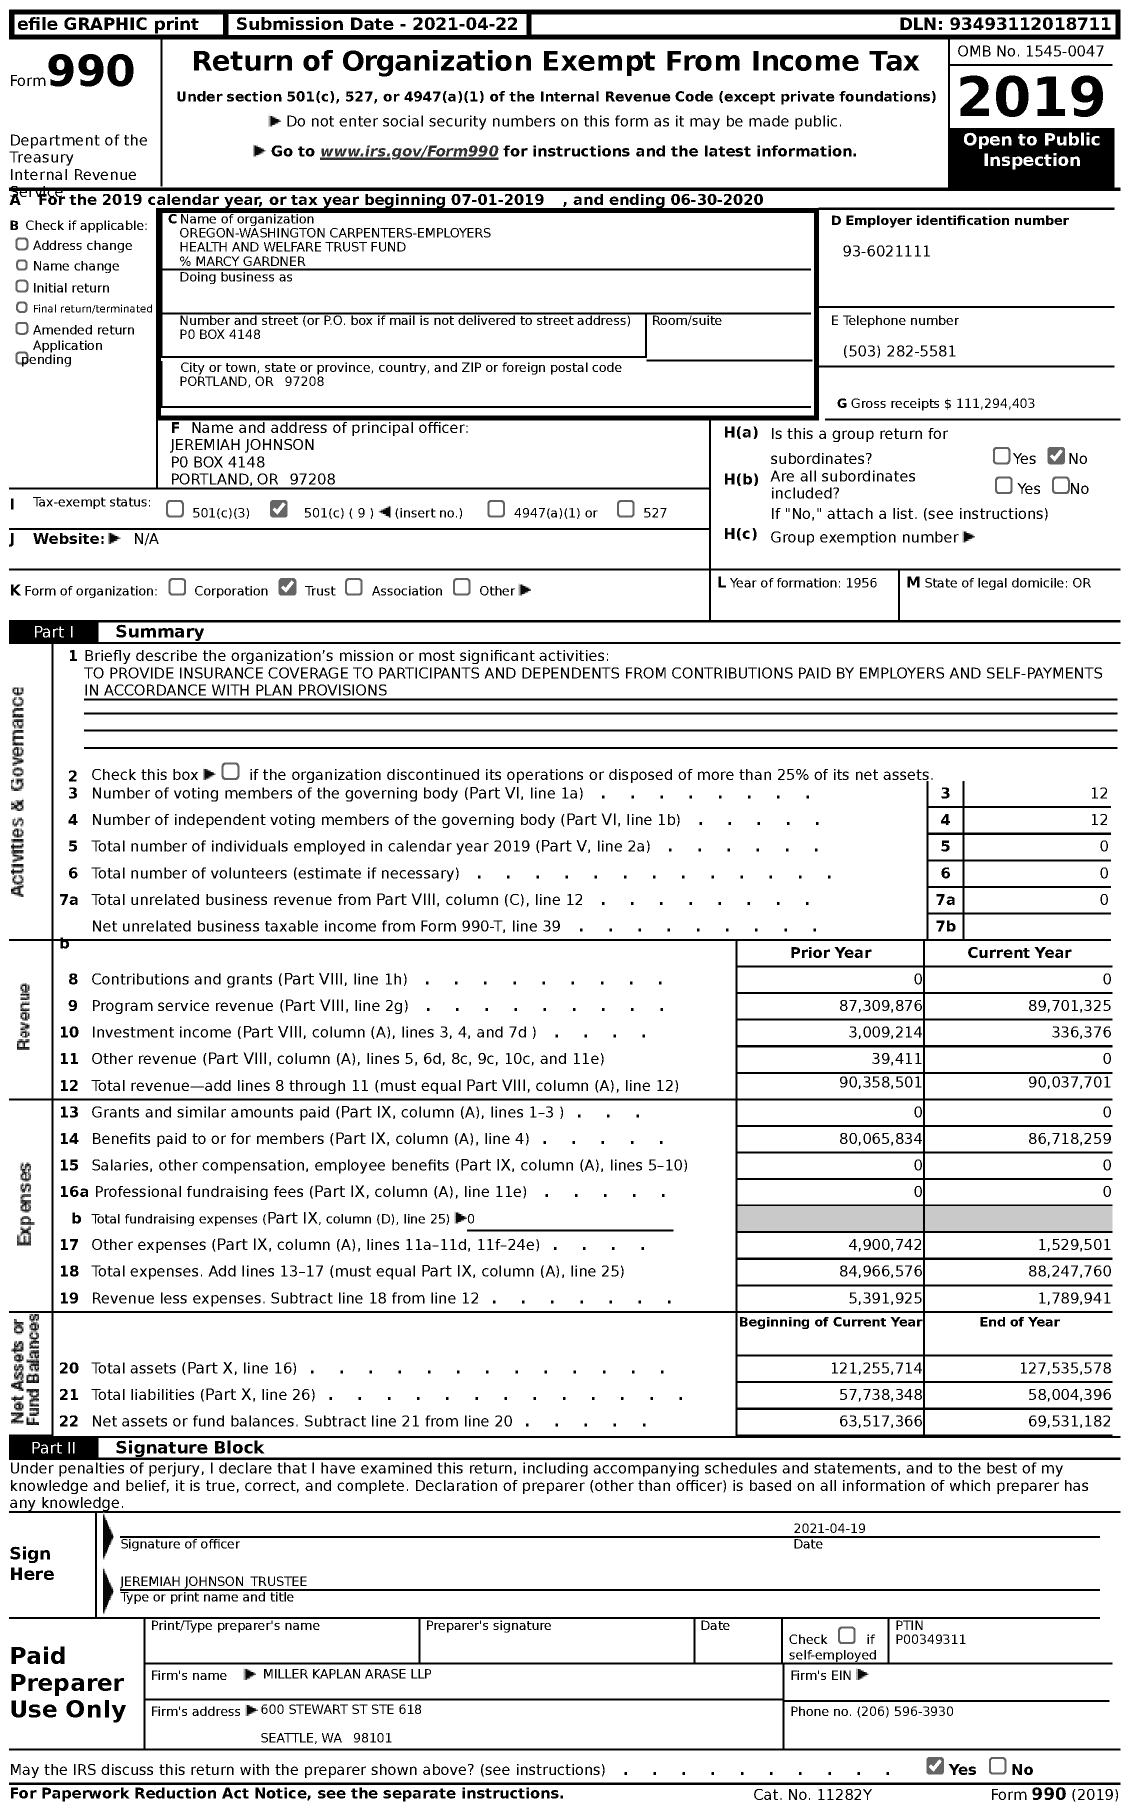 Image of first page of 2019 Form 990 for Oregon-Washington Carpenters-Employers Health and Welfare Trust Fund